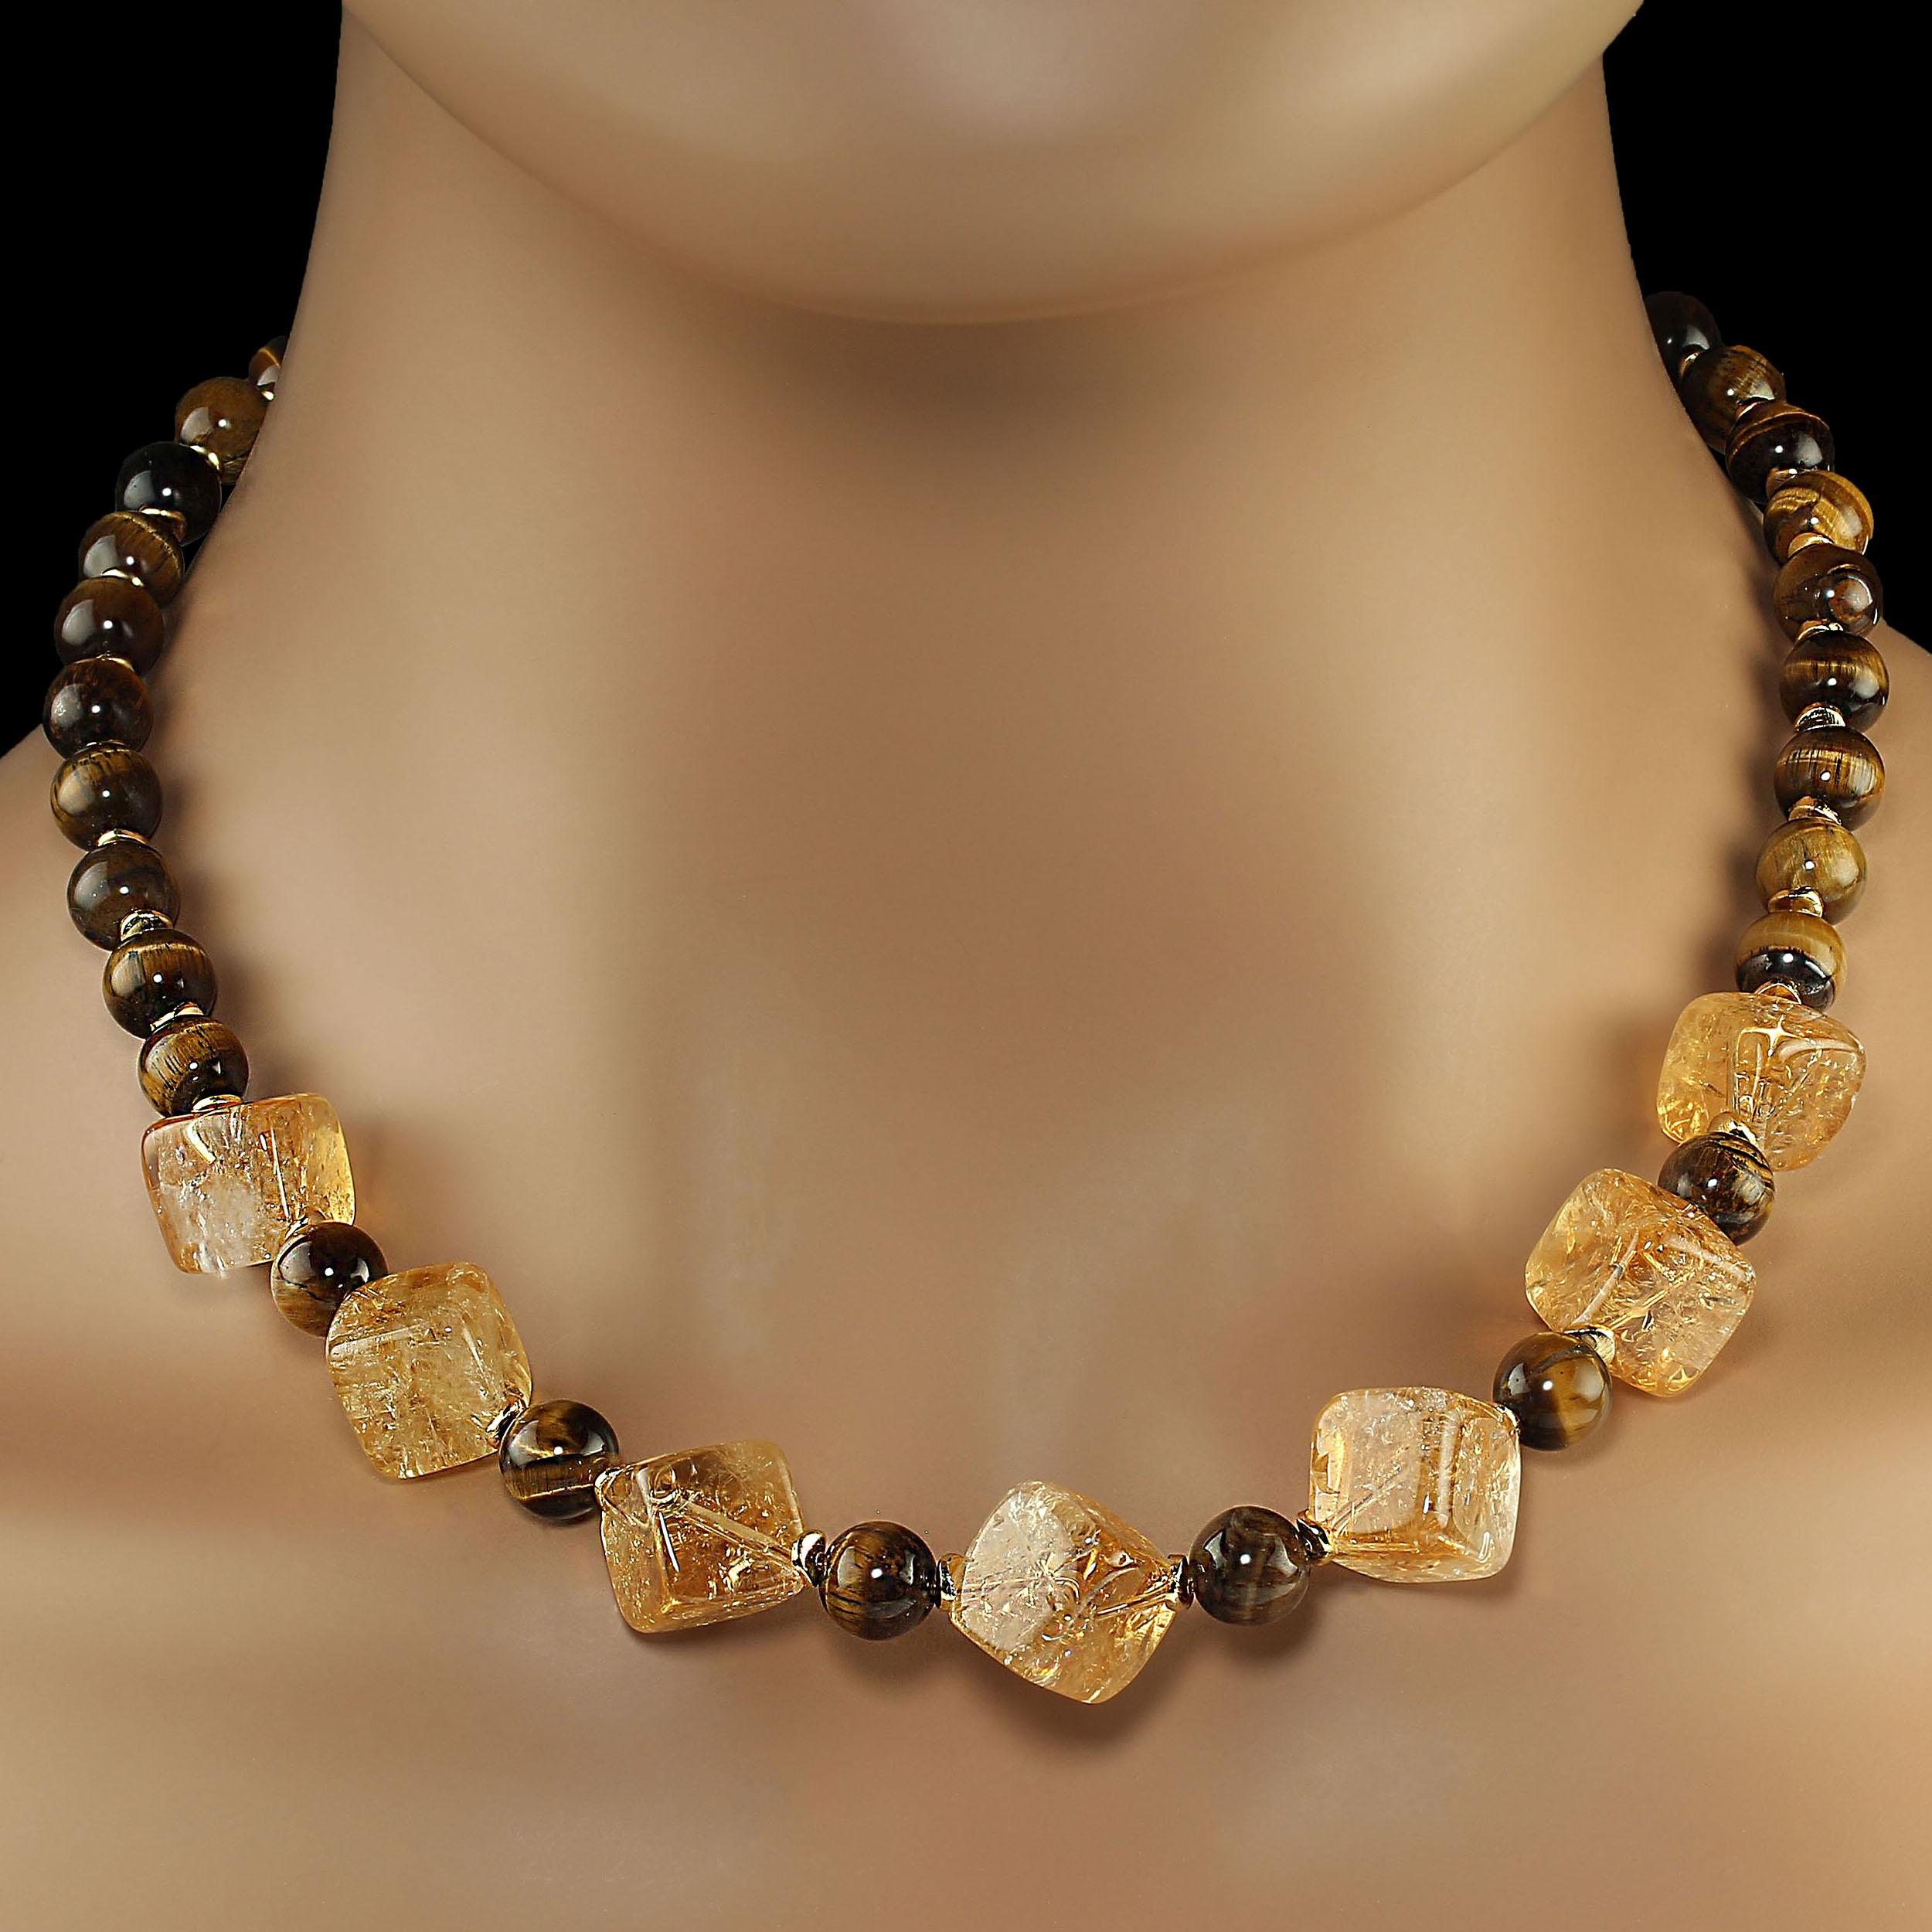 Artisan AJD 18 Inch Statement Citrine and Tiger's Eye Necklace For Sale